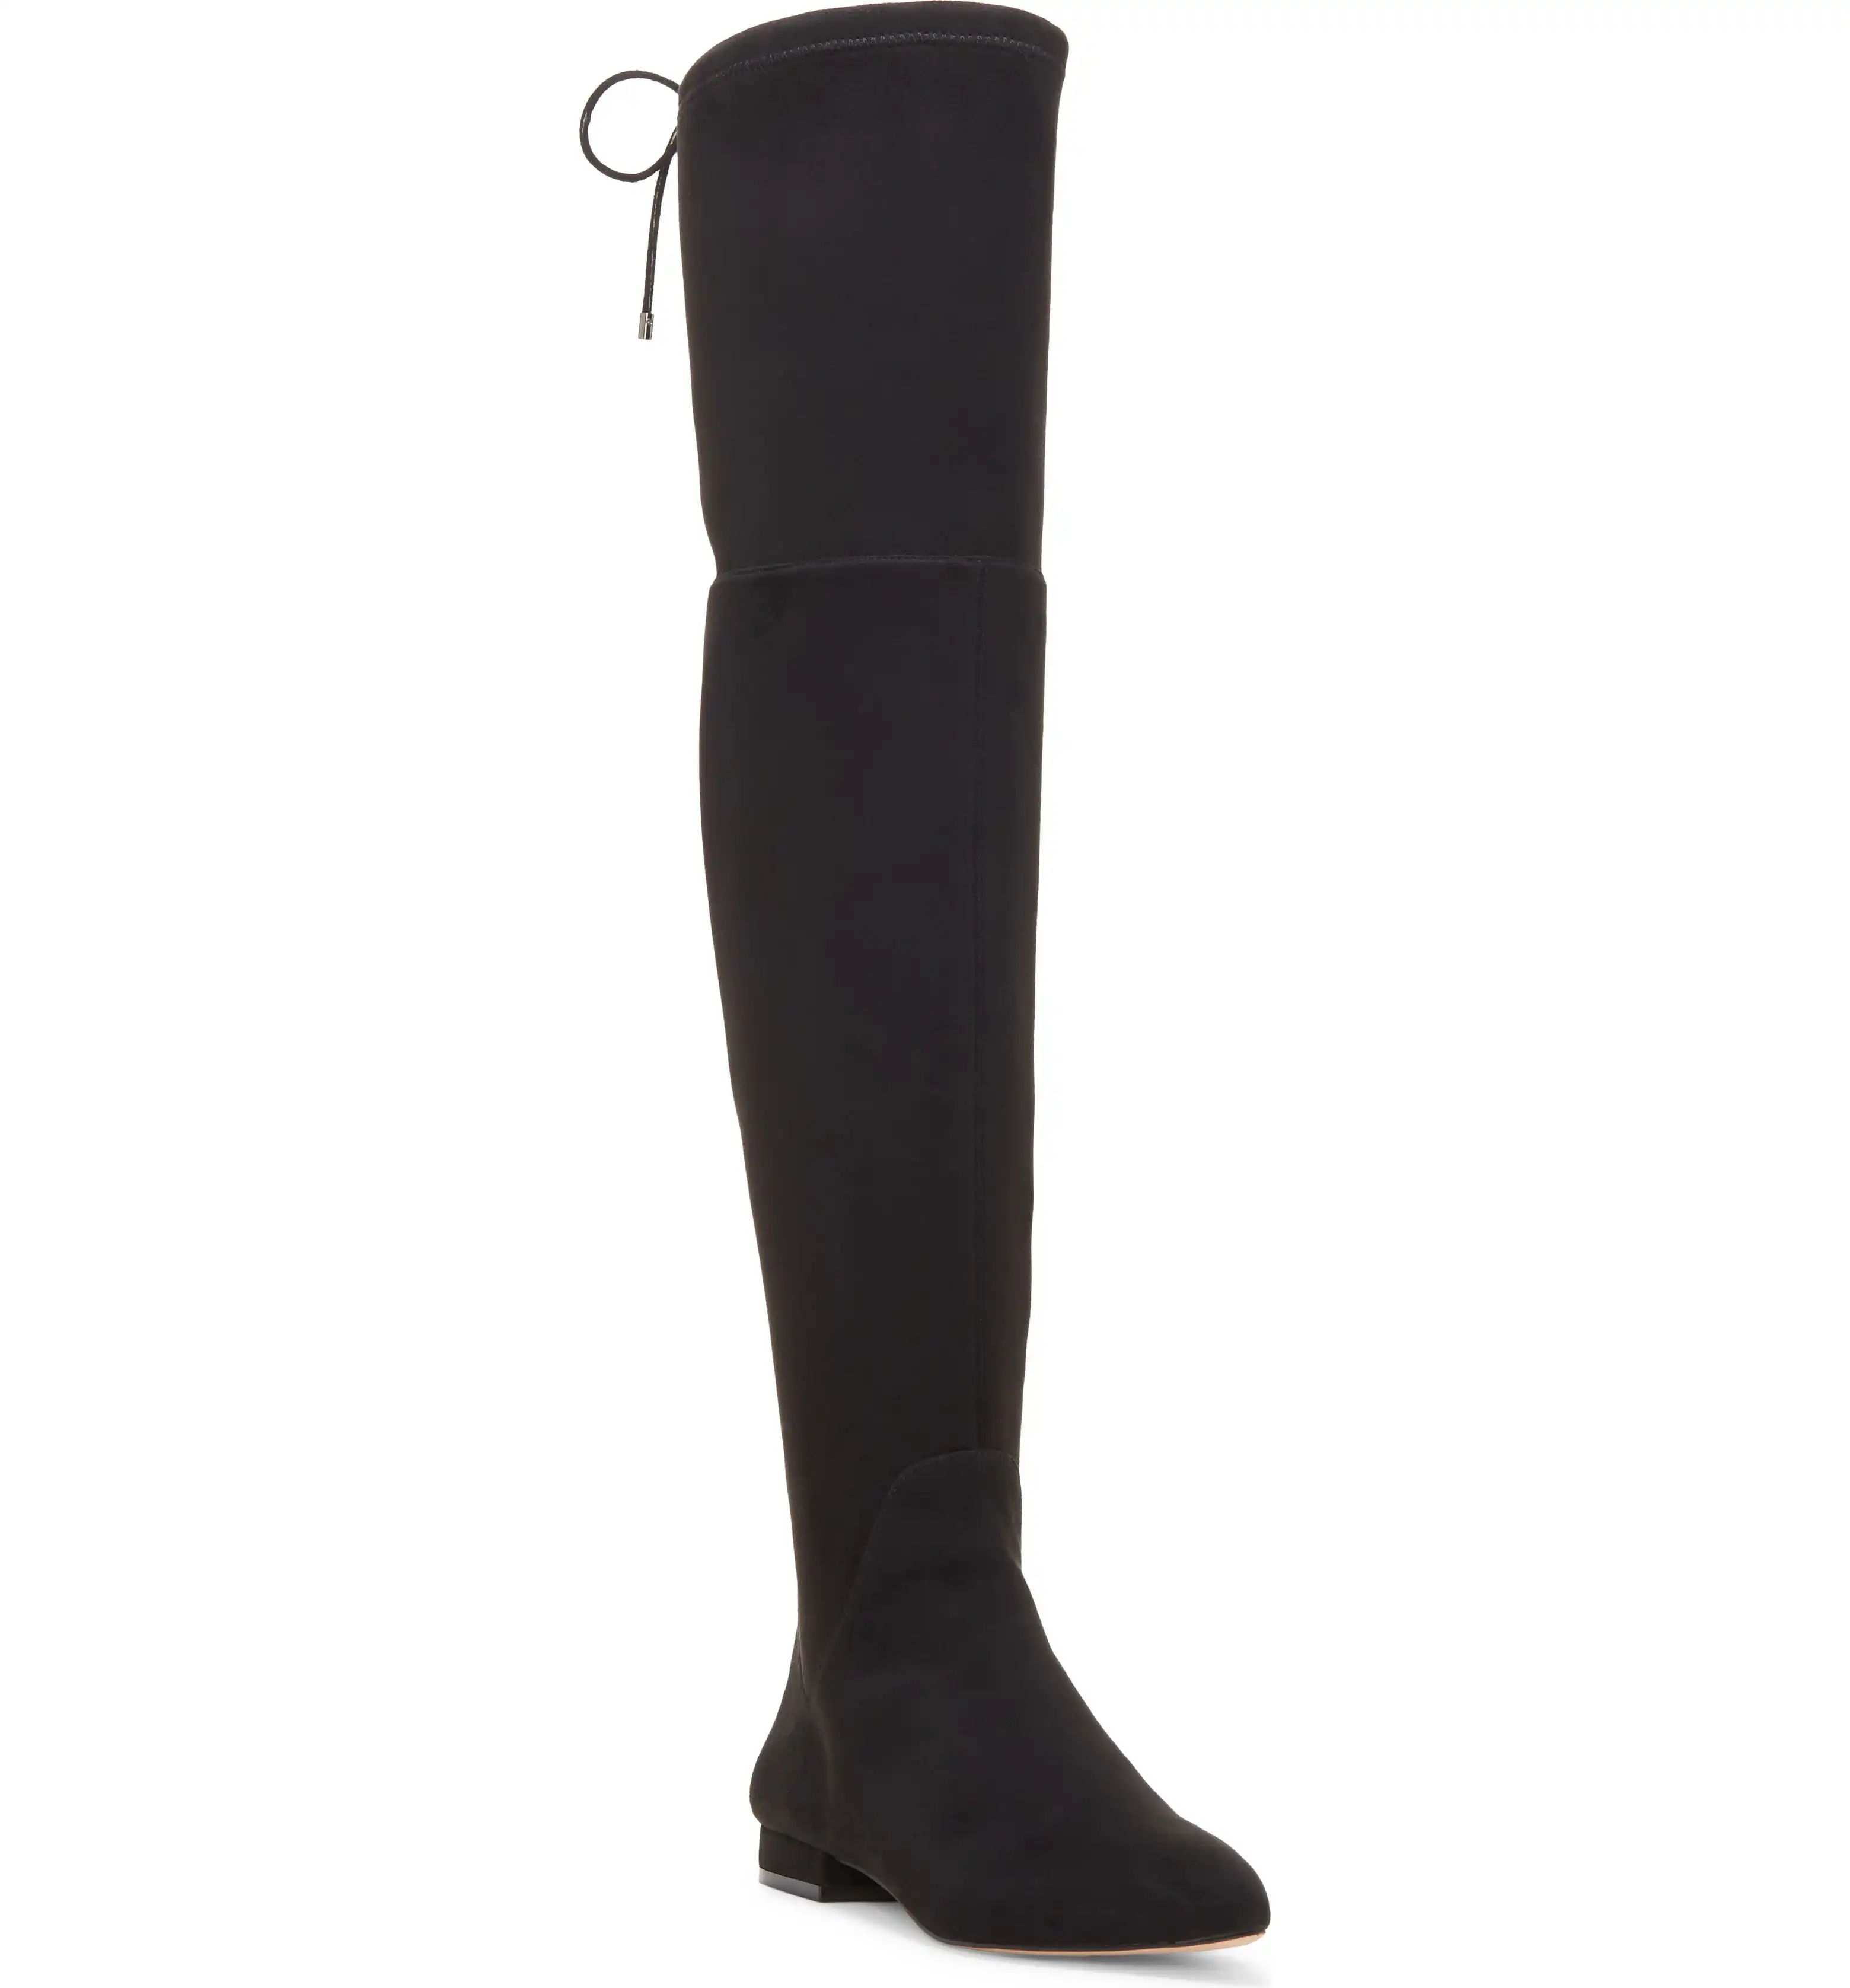 Meloren Over-the-Knee Stretch Boot | Nordstrom